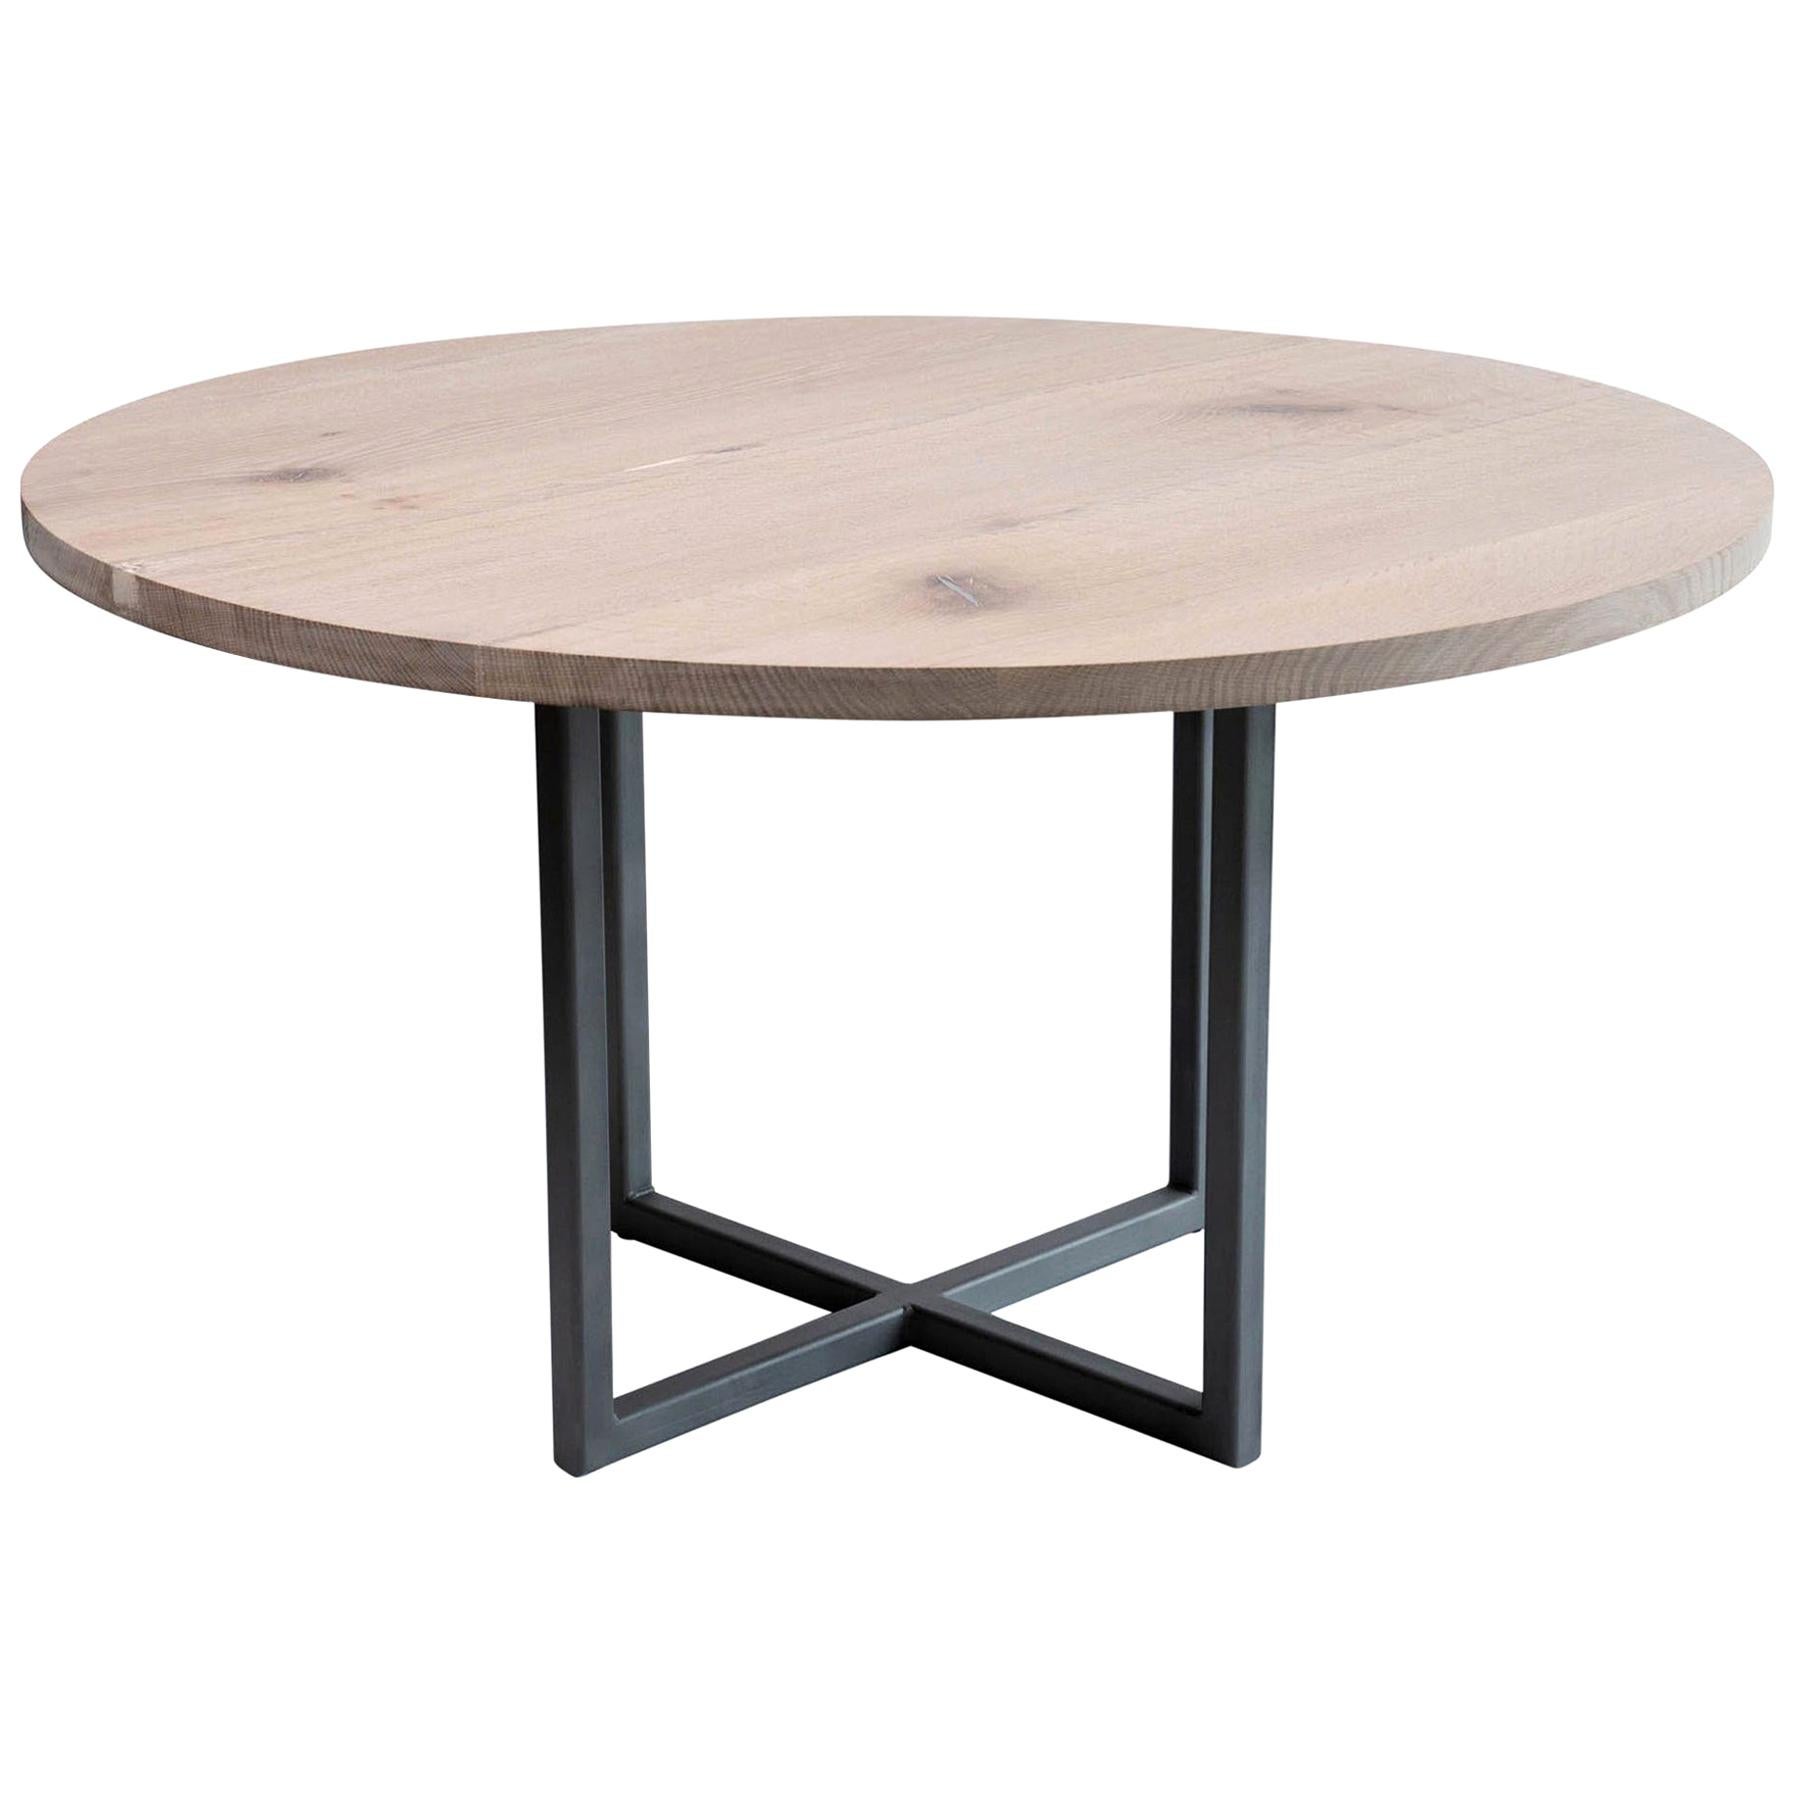 Round Dining Table In Light Wood And, Round White Dining Table With Pedestal Base